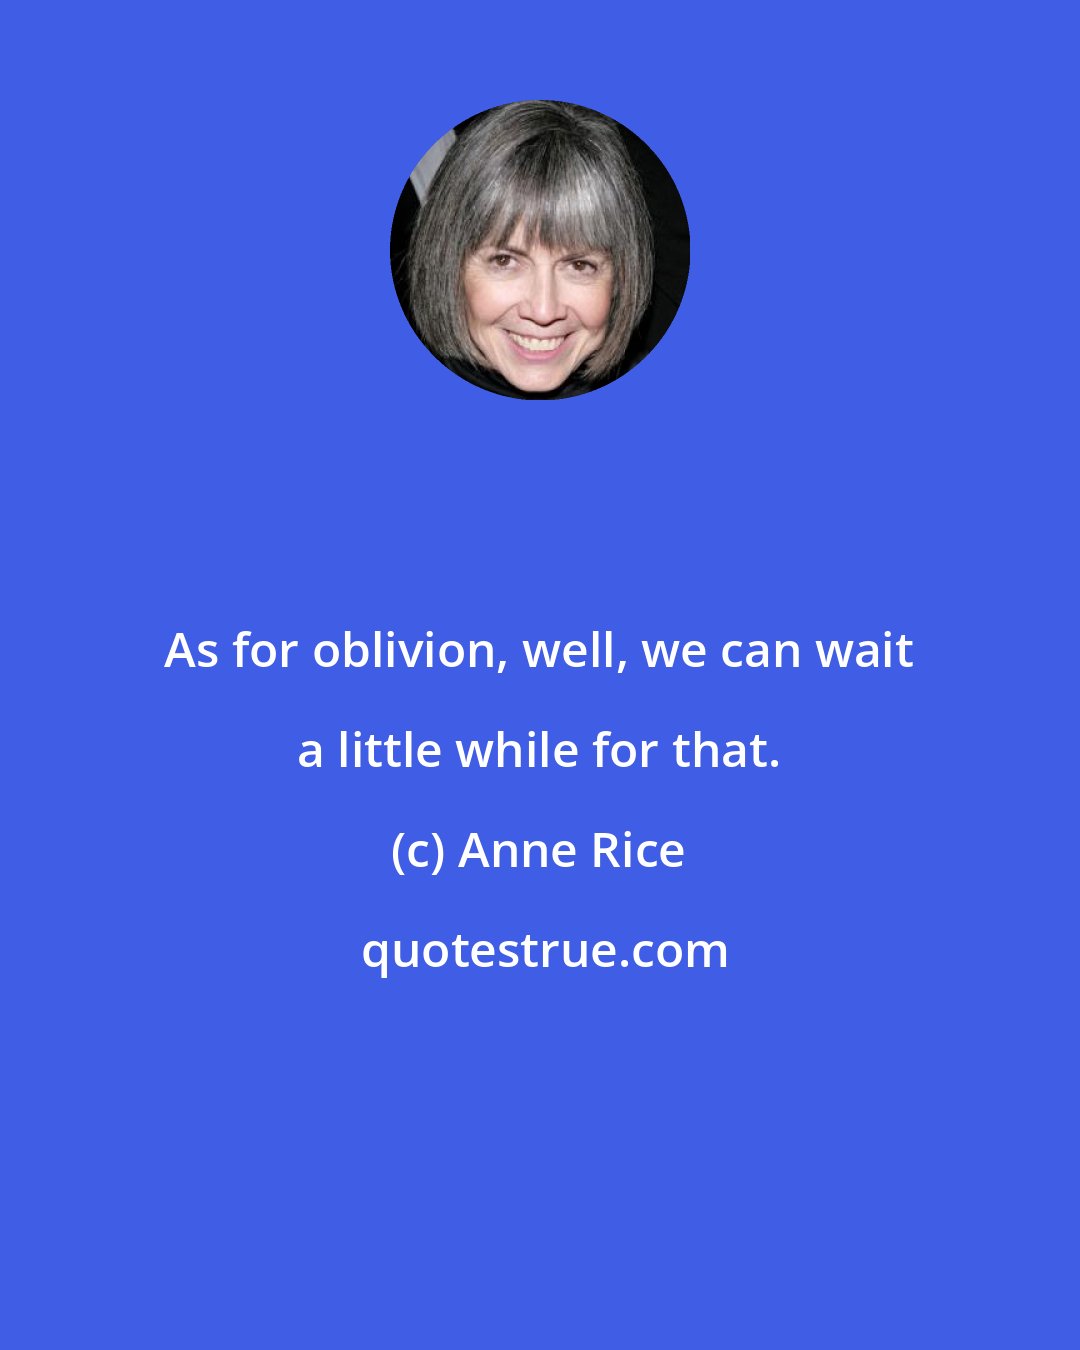 Anne Rice: As for oblivion, well, we can wait a little while for that.